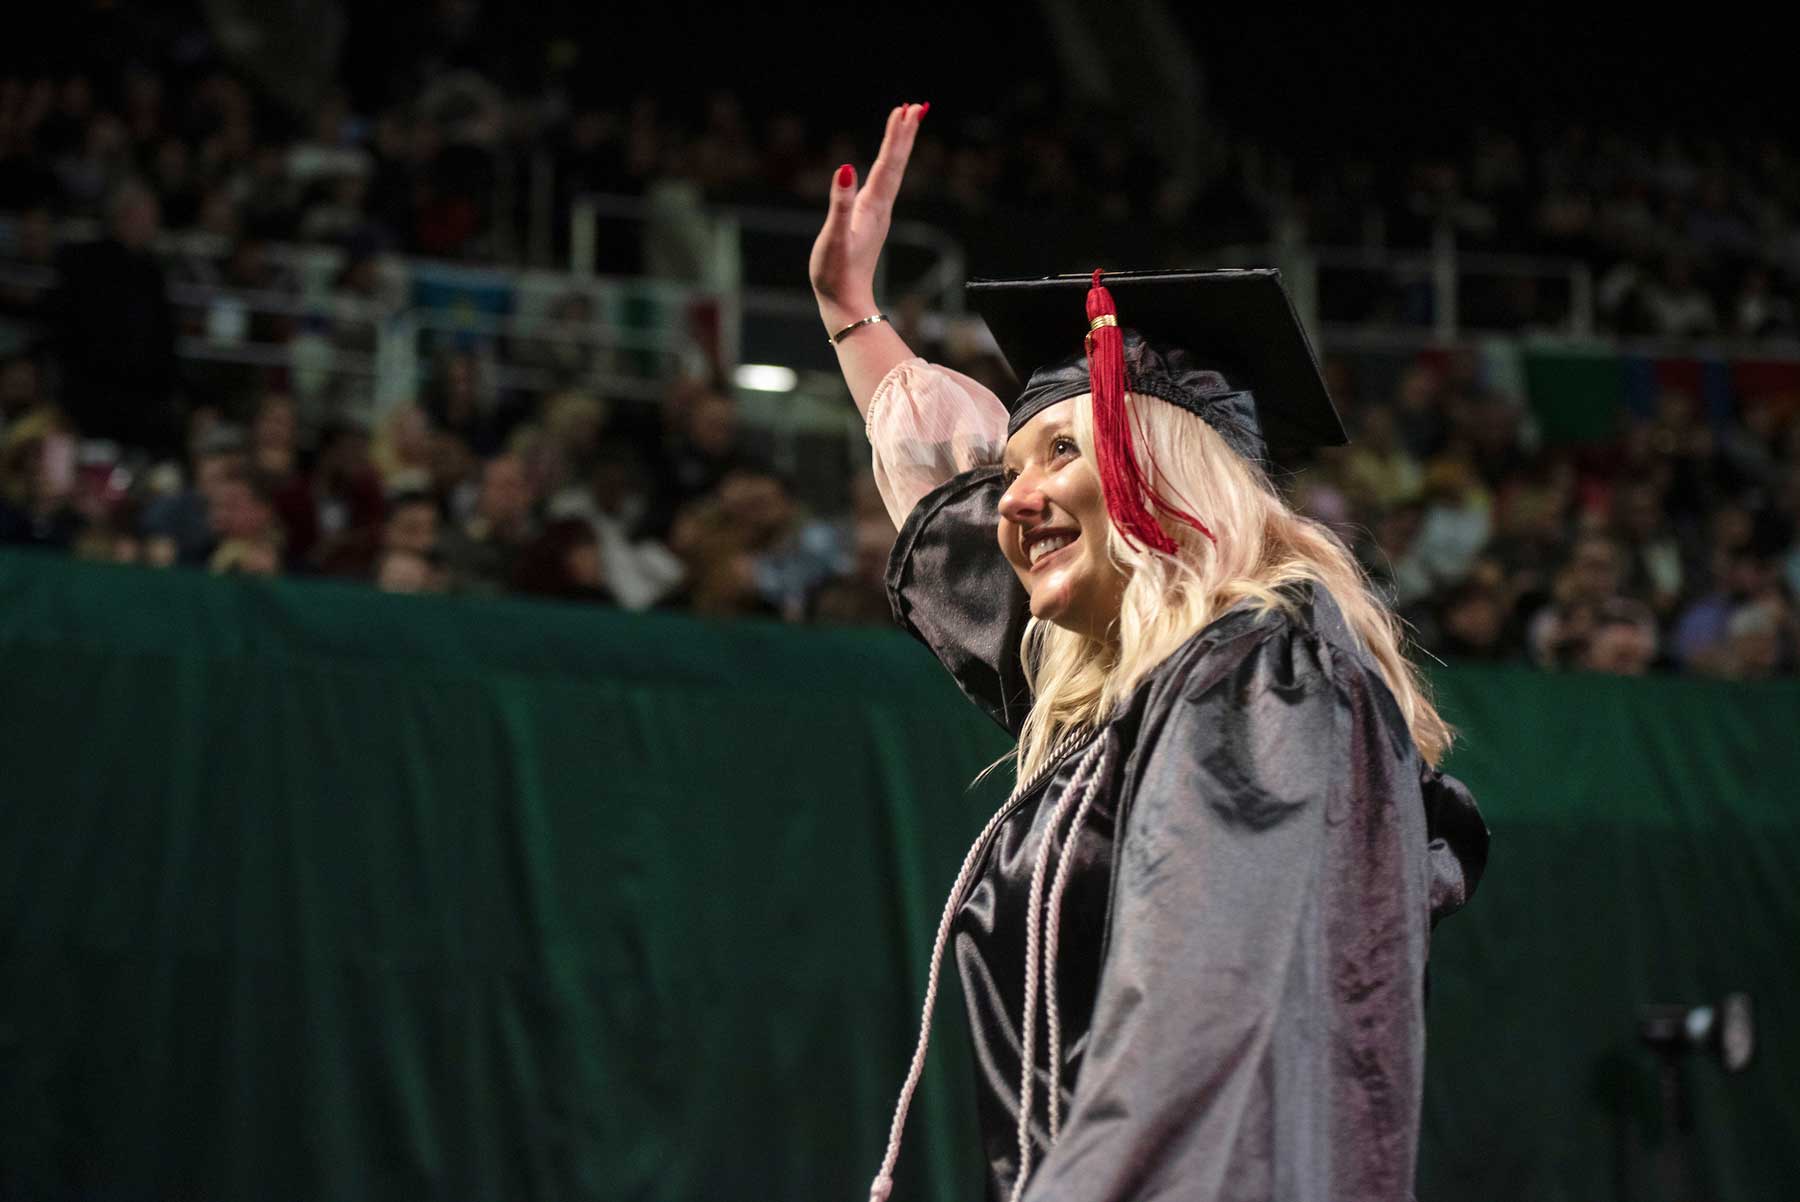 Carly McFadden waving to the crowd during graduation.